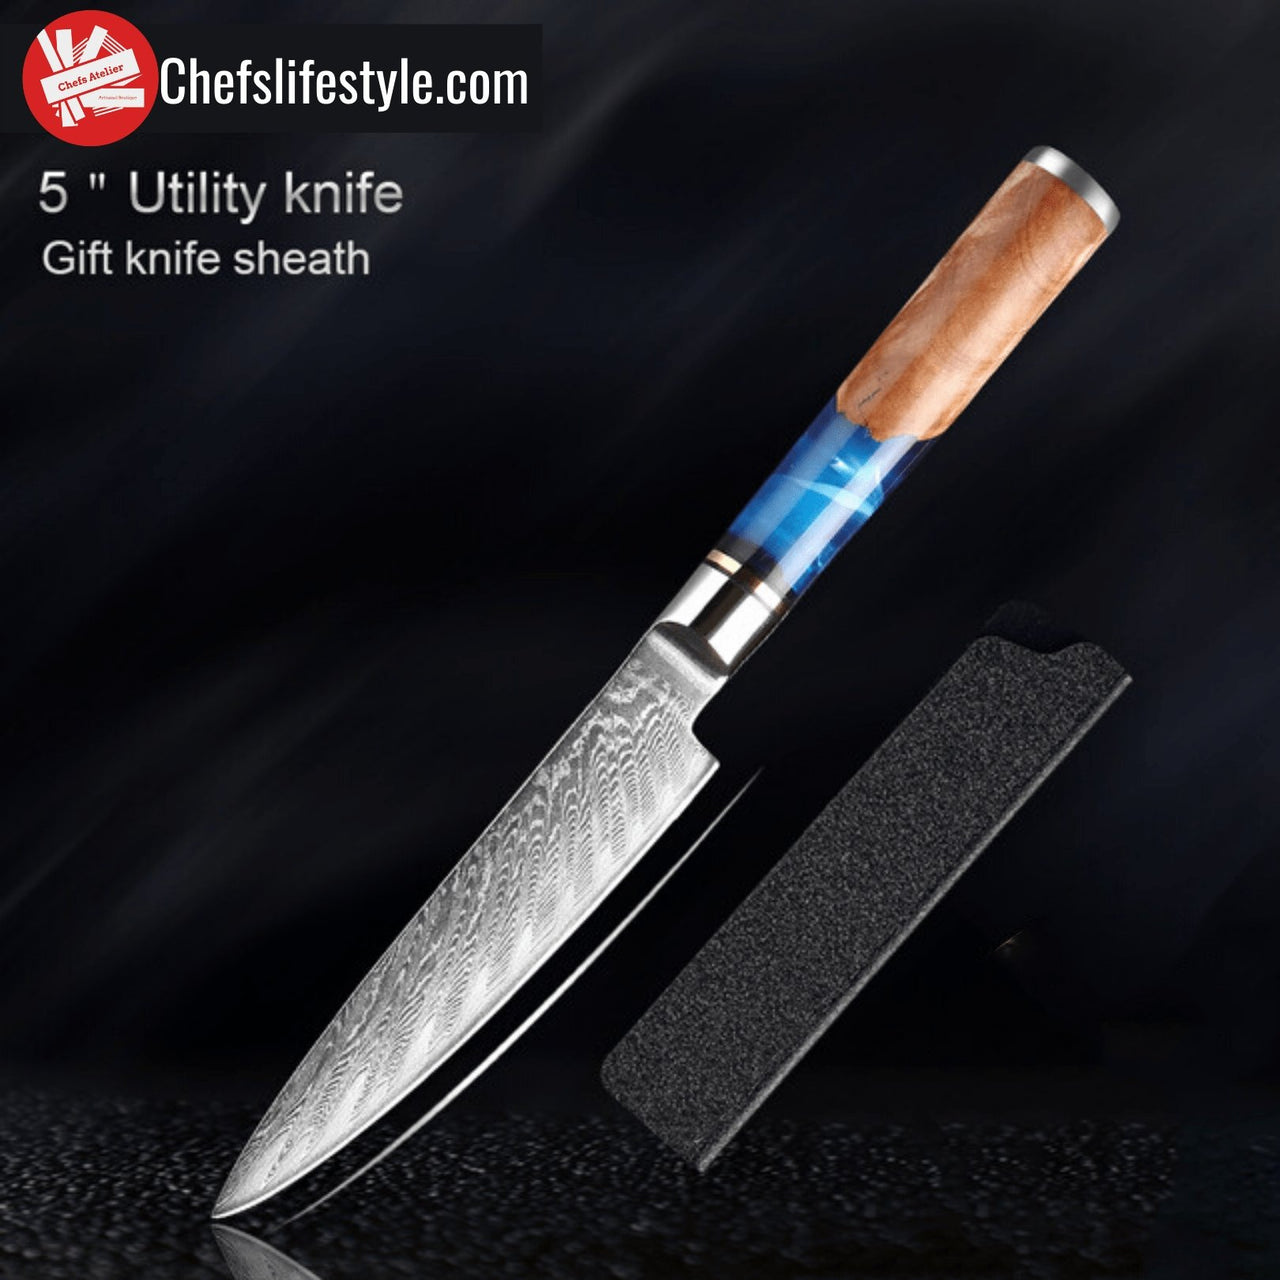 chefslifestyle chef lifestyle Chefs Atelier by Unicommerce Pte. Ltd. Kiyomi Series Knife 5 inch utility knife damascus knives chef knife chef atelier best knife japanese review top lightweight balanced hand made kiritsuke serbian butcher knife hand forged best top quality free shipping high carbon steel